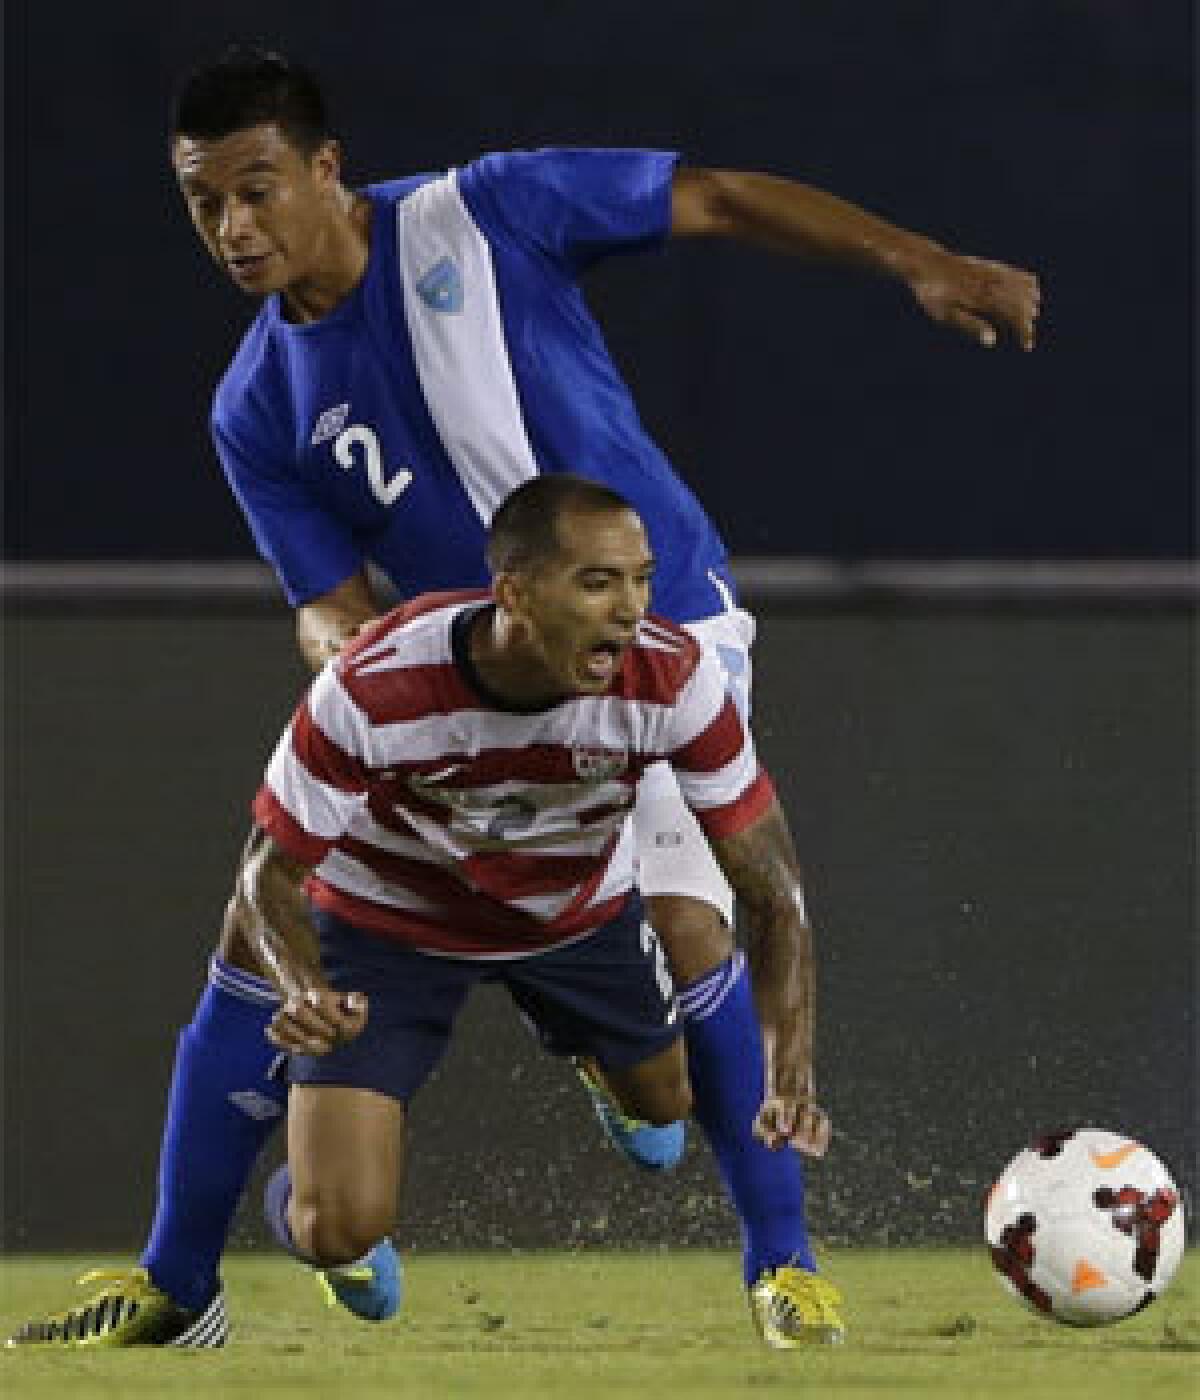 Edgar Castillo of the U.S. team, front, falls as Guatemala's Carlos Castrillo defends during an international friendly soccer match in July.